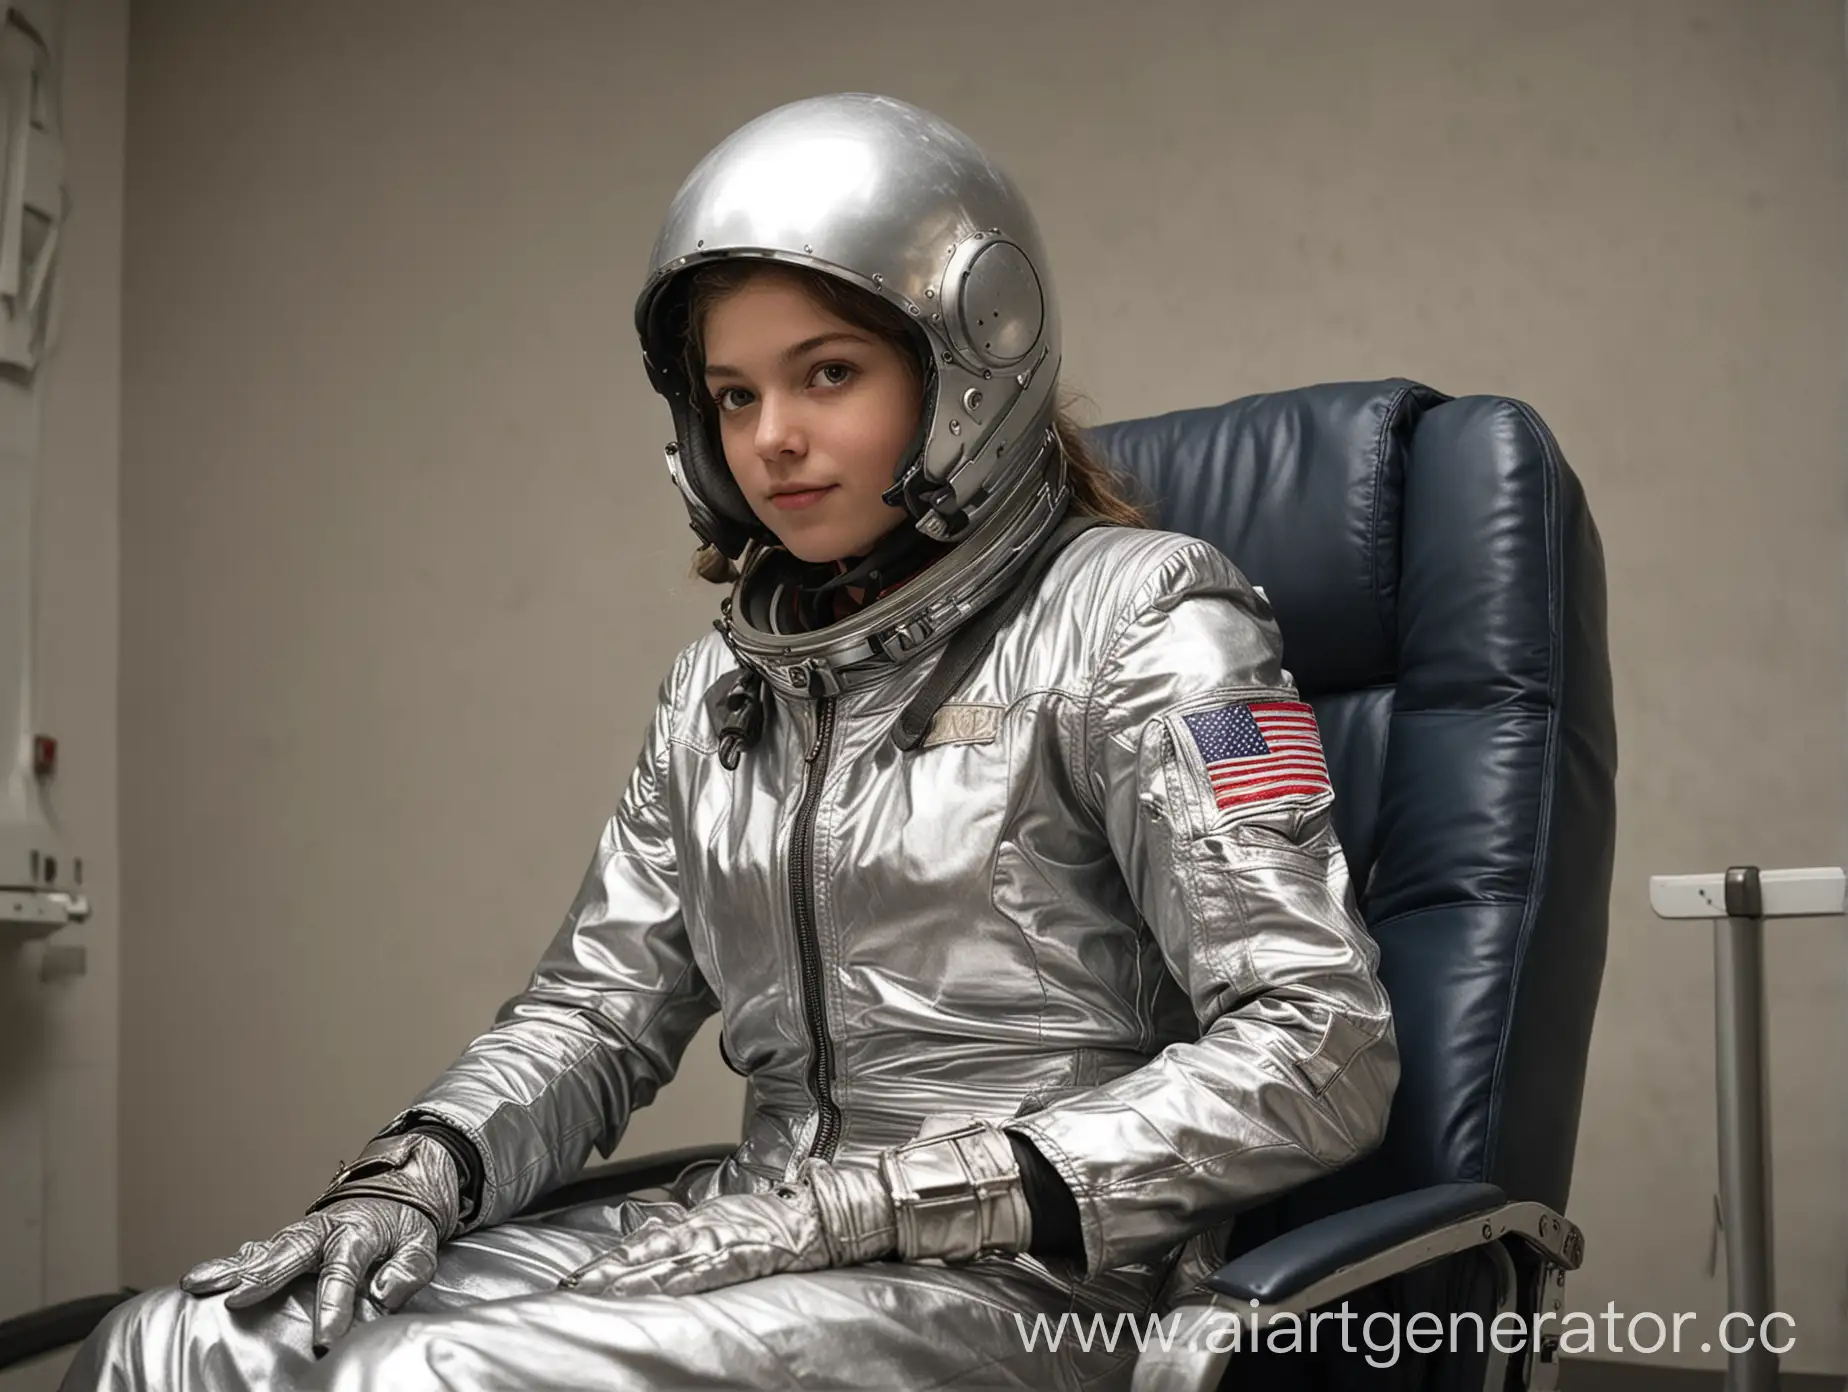 Young-Astronaut-in-Silvery-Spacesuit-Prepares-for-First-Spaceflight